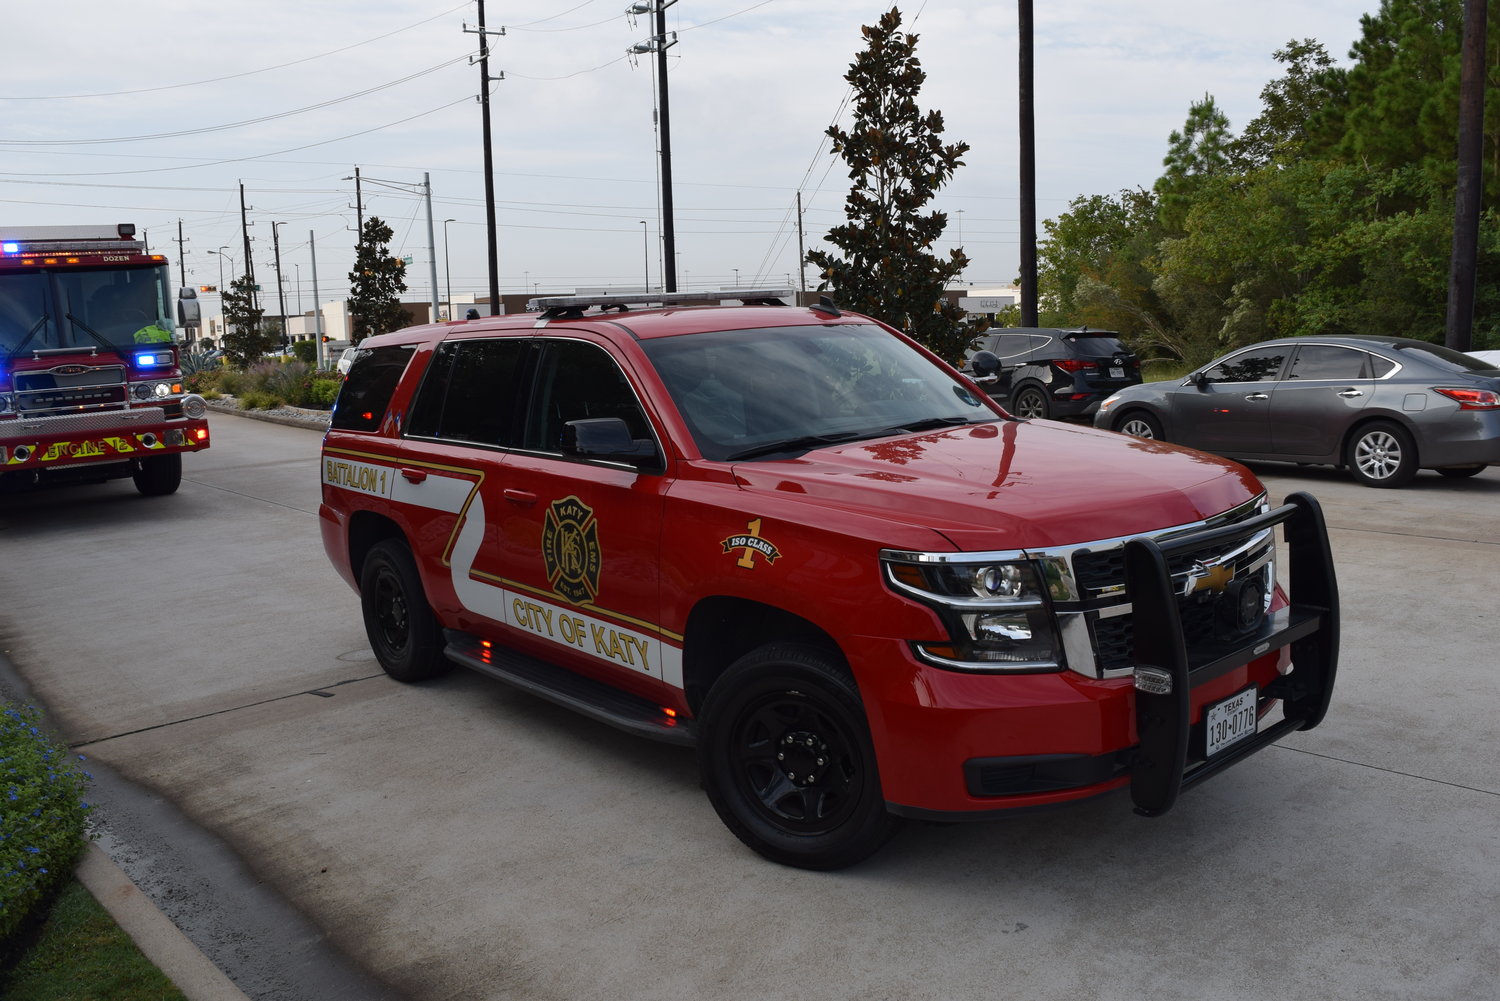 The city of Katy Fire Department was one of several departments to assist Harris County ESD 48 at the scene.